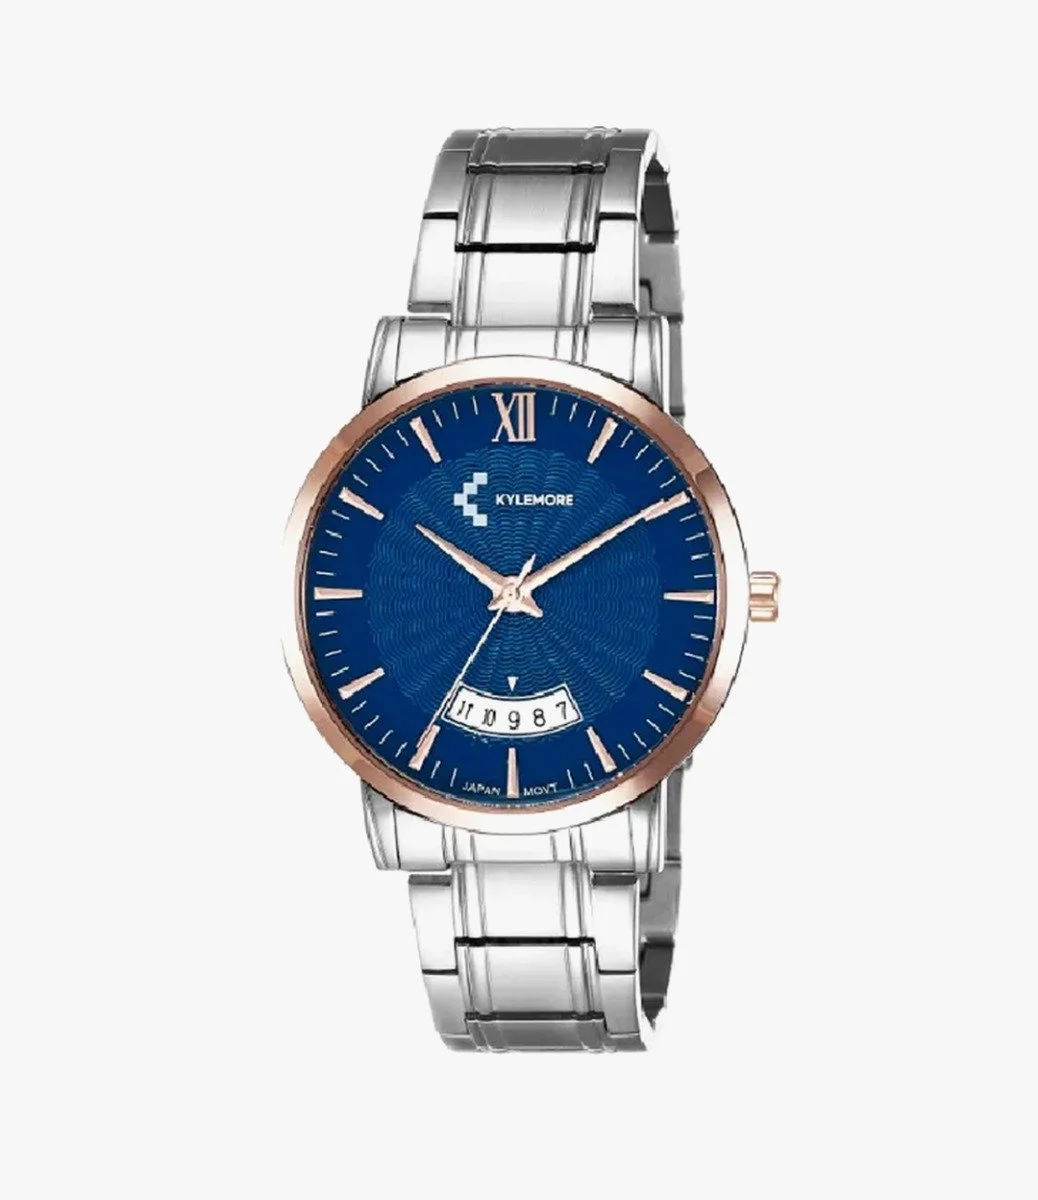 The Silver and Blue Kylemore Watch